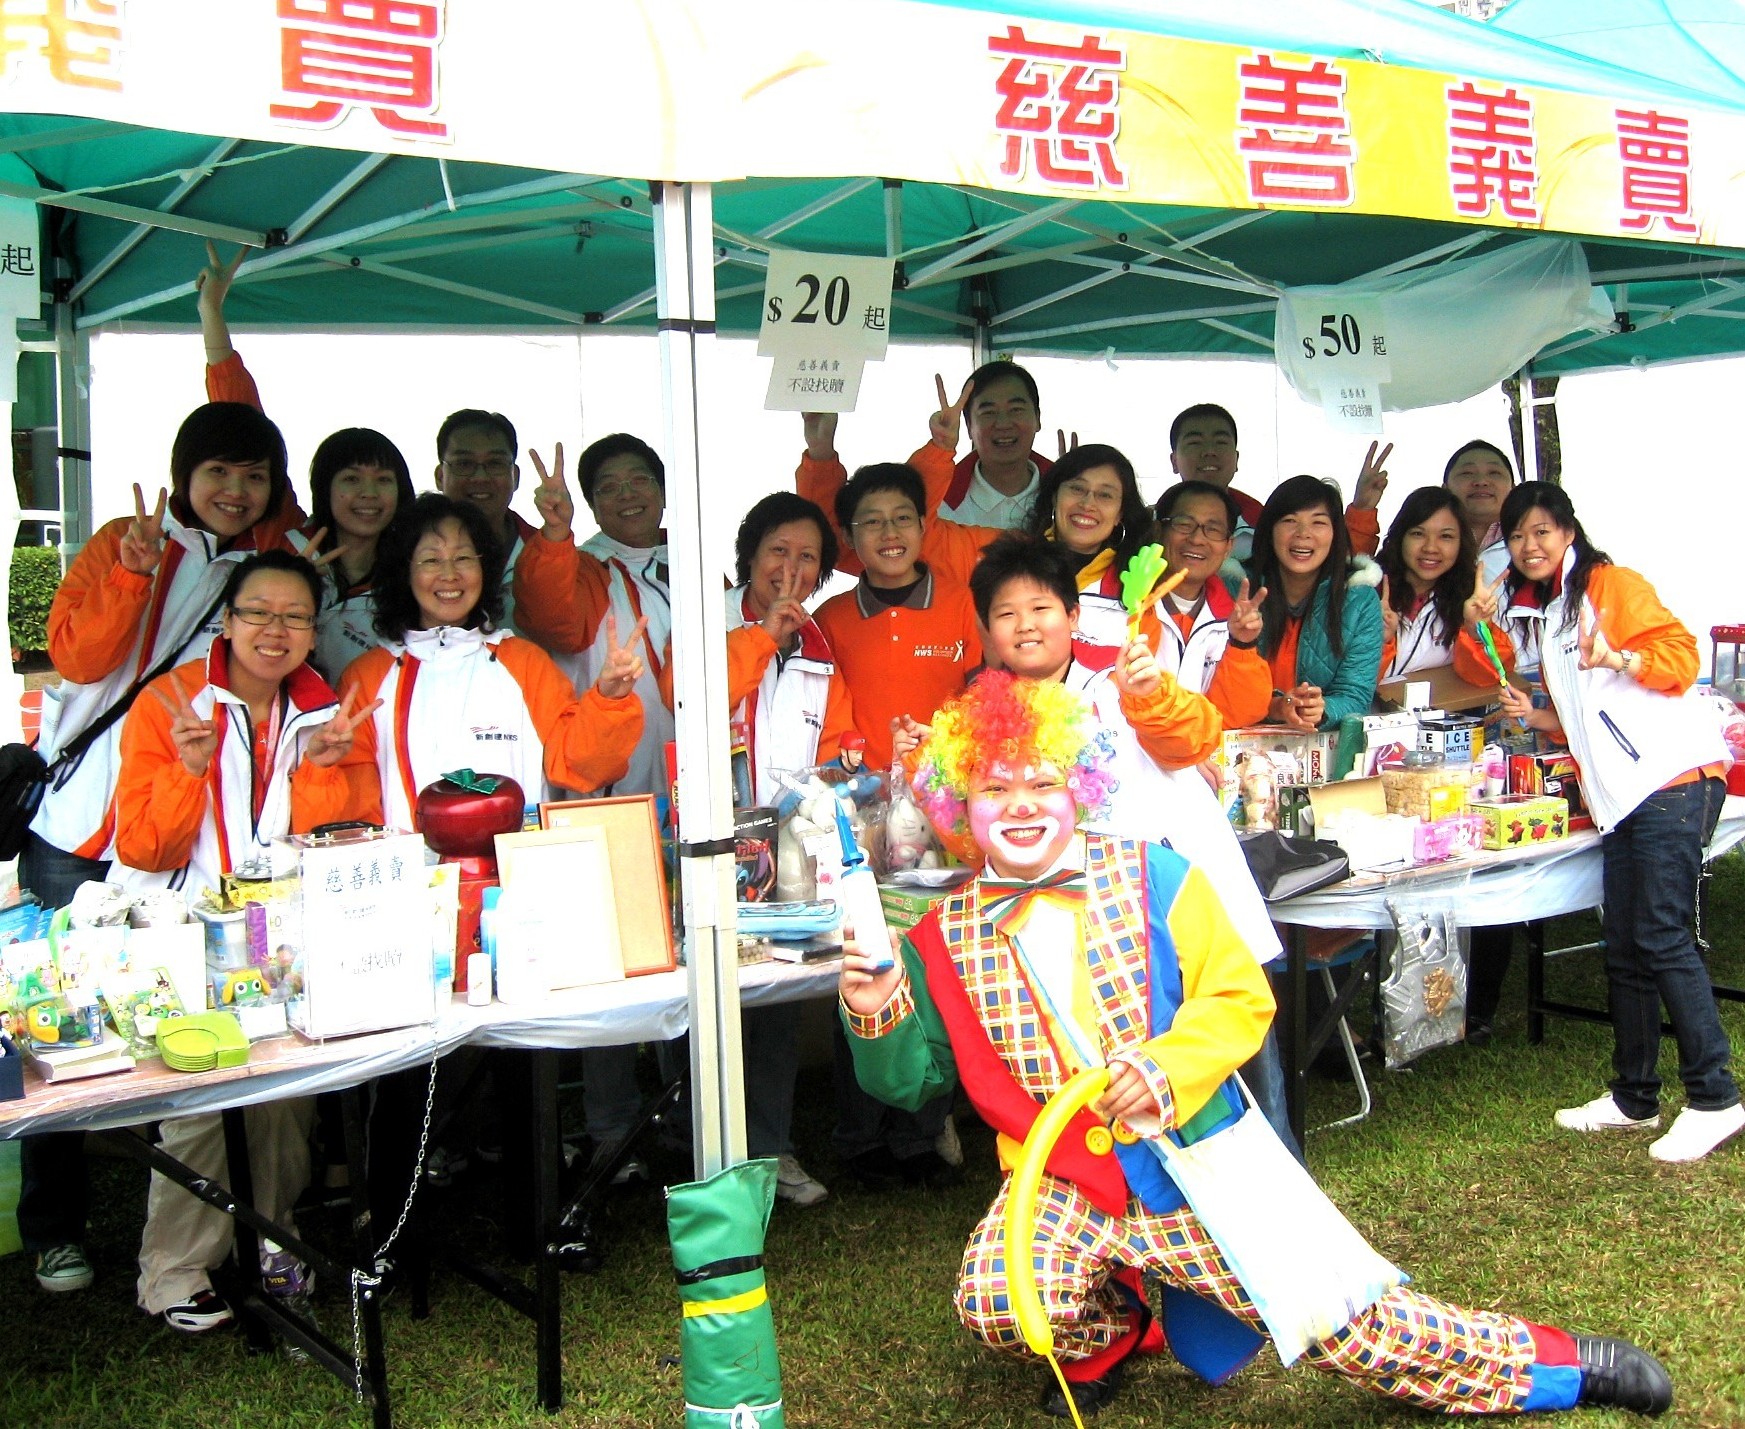 Building team spirit in NWS Holdings Fun Day 2008